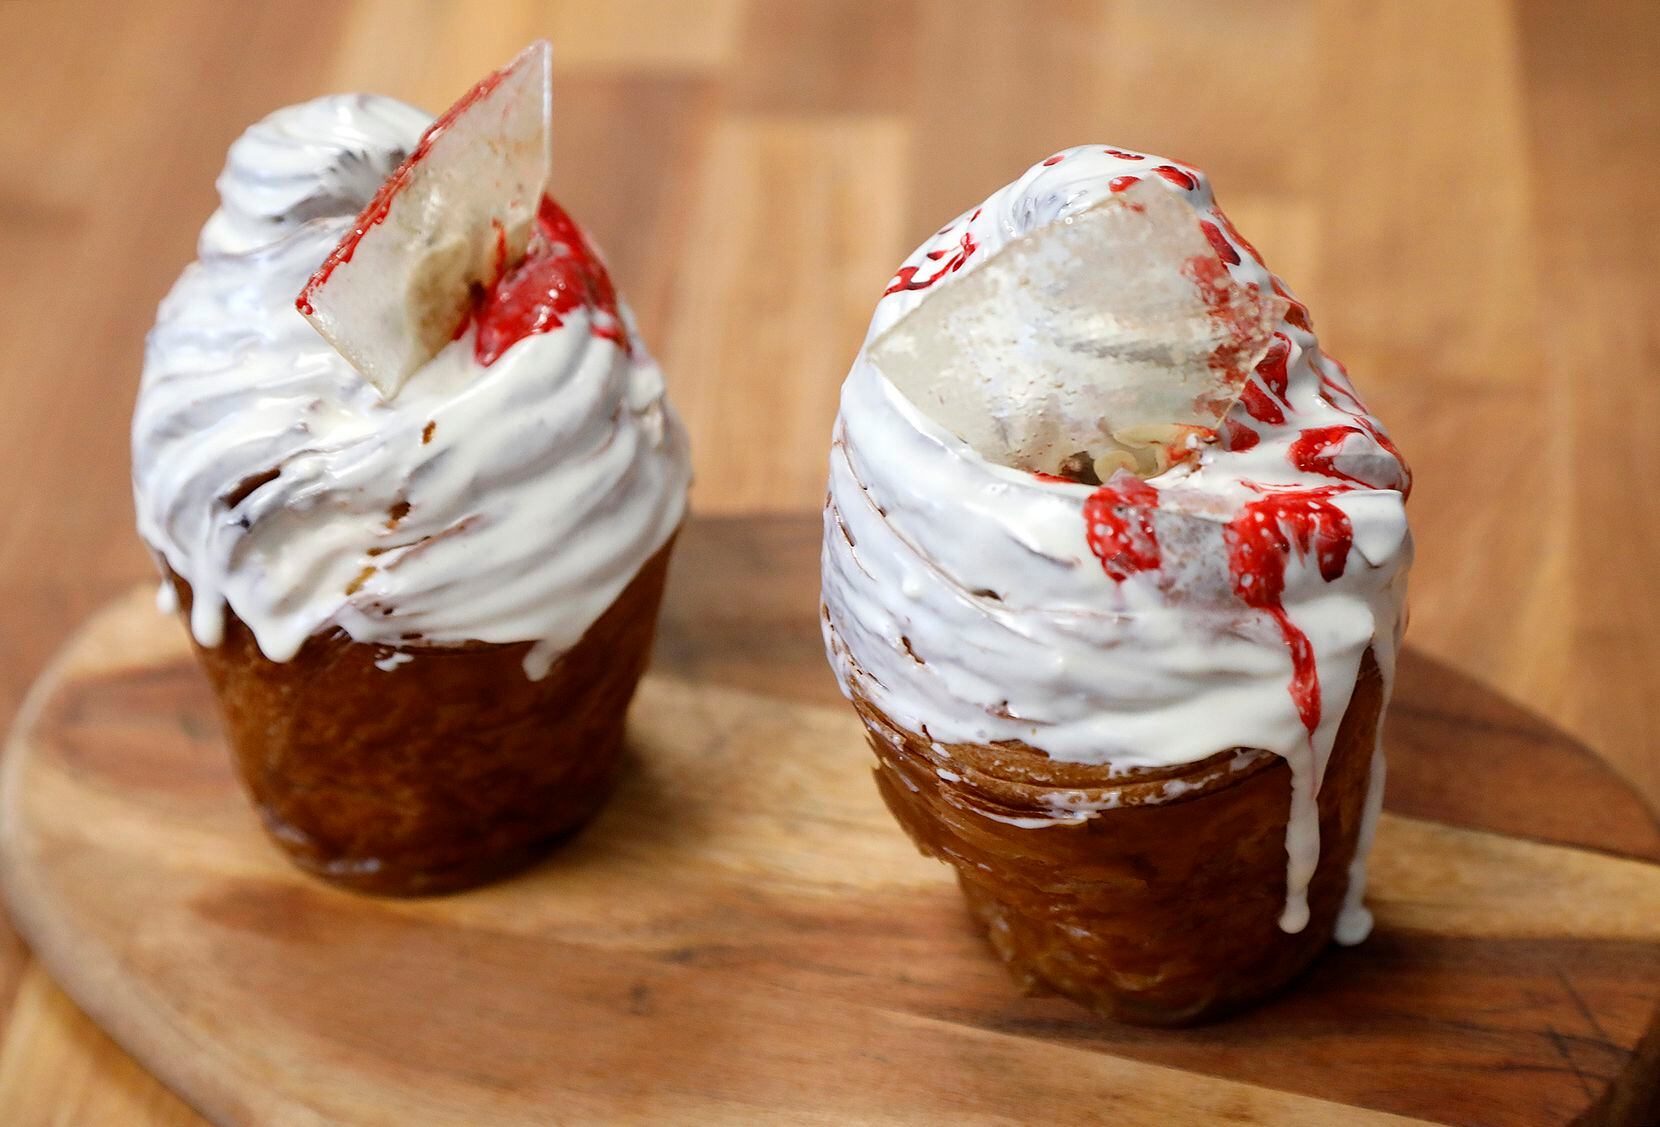 Cruffins, made with rasberry curd, white chocolate glaze, and candy glass at La Casita Bakeshop